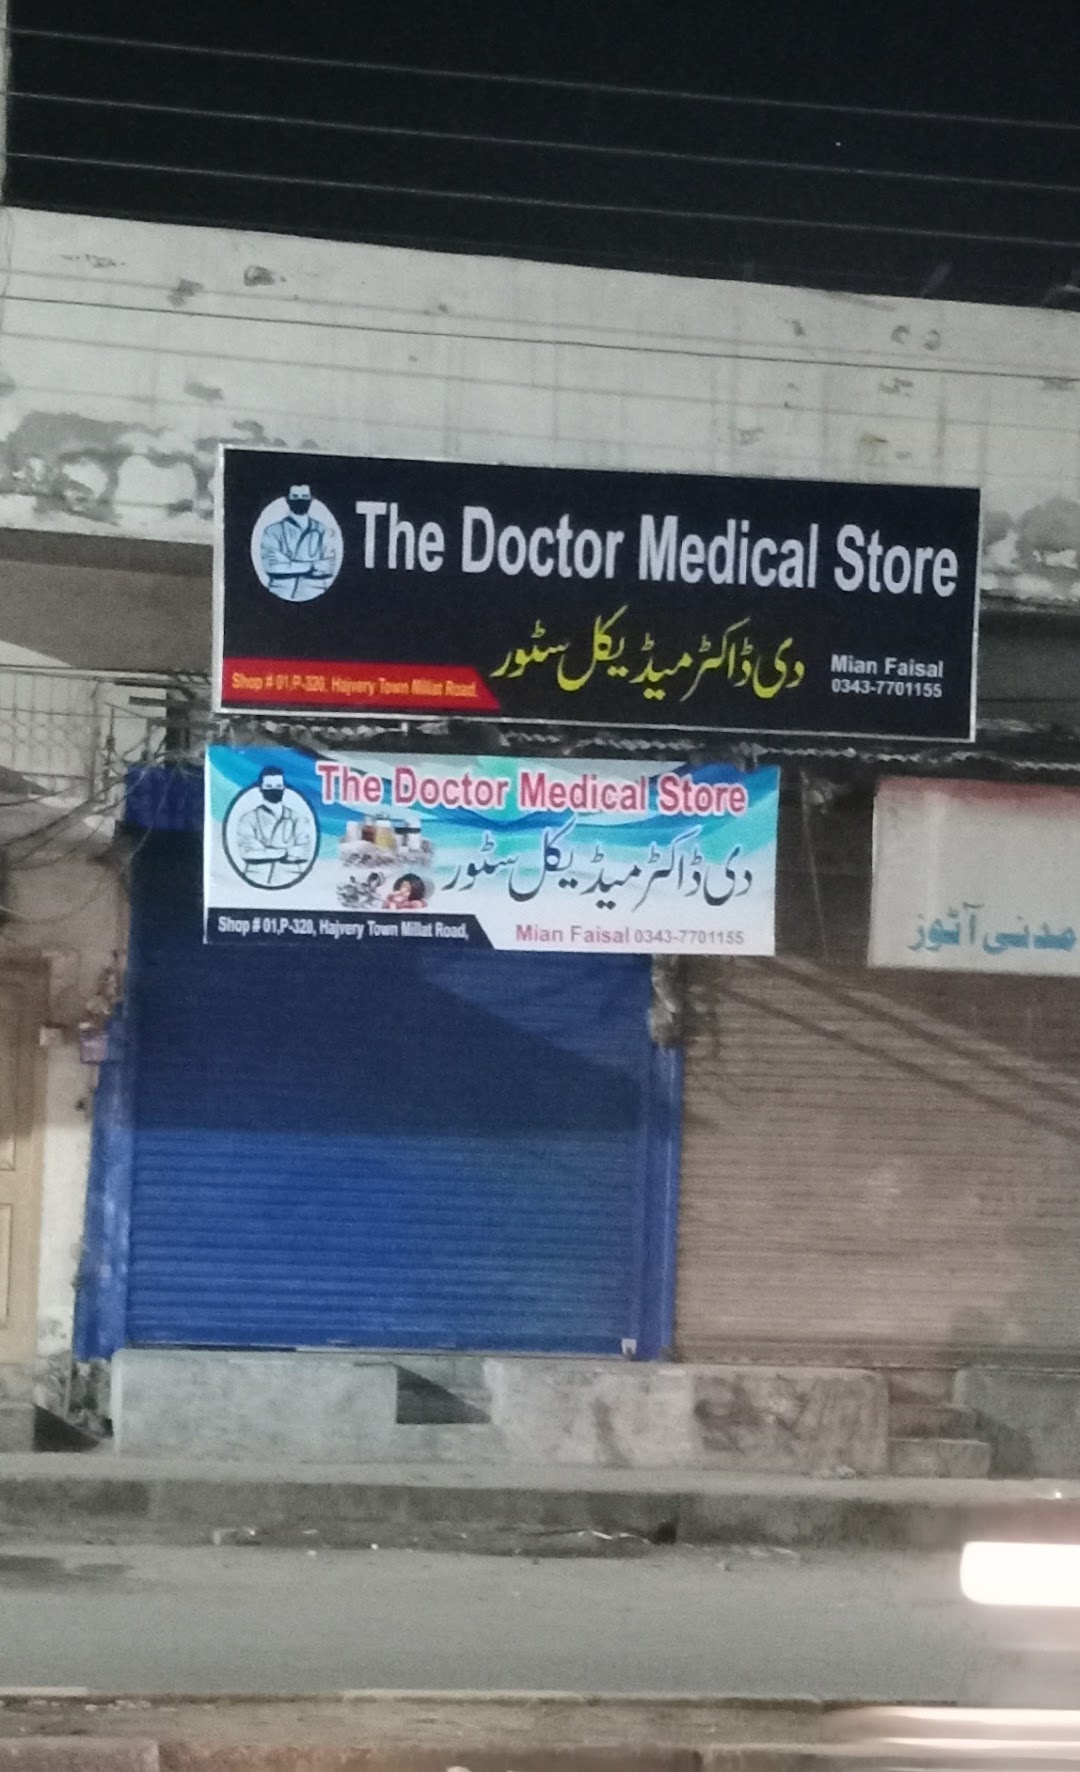 The Doctor Medical Store